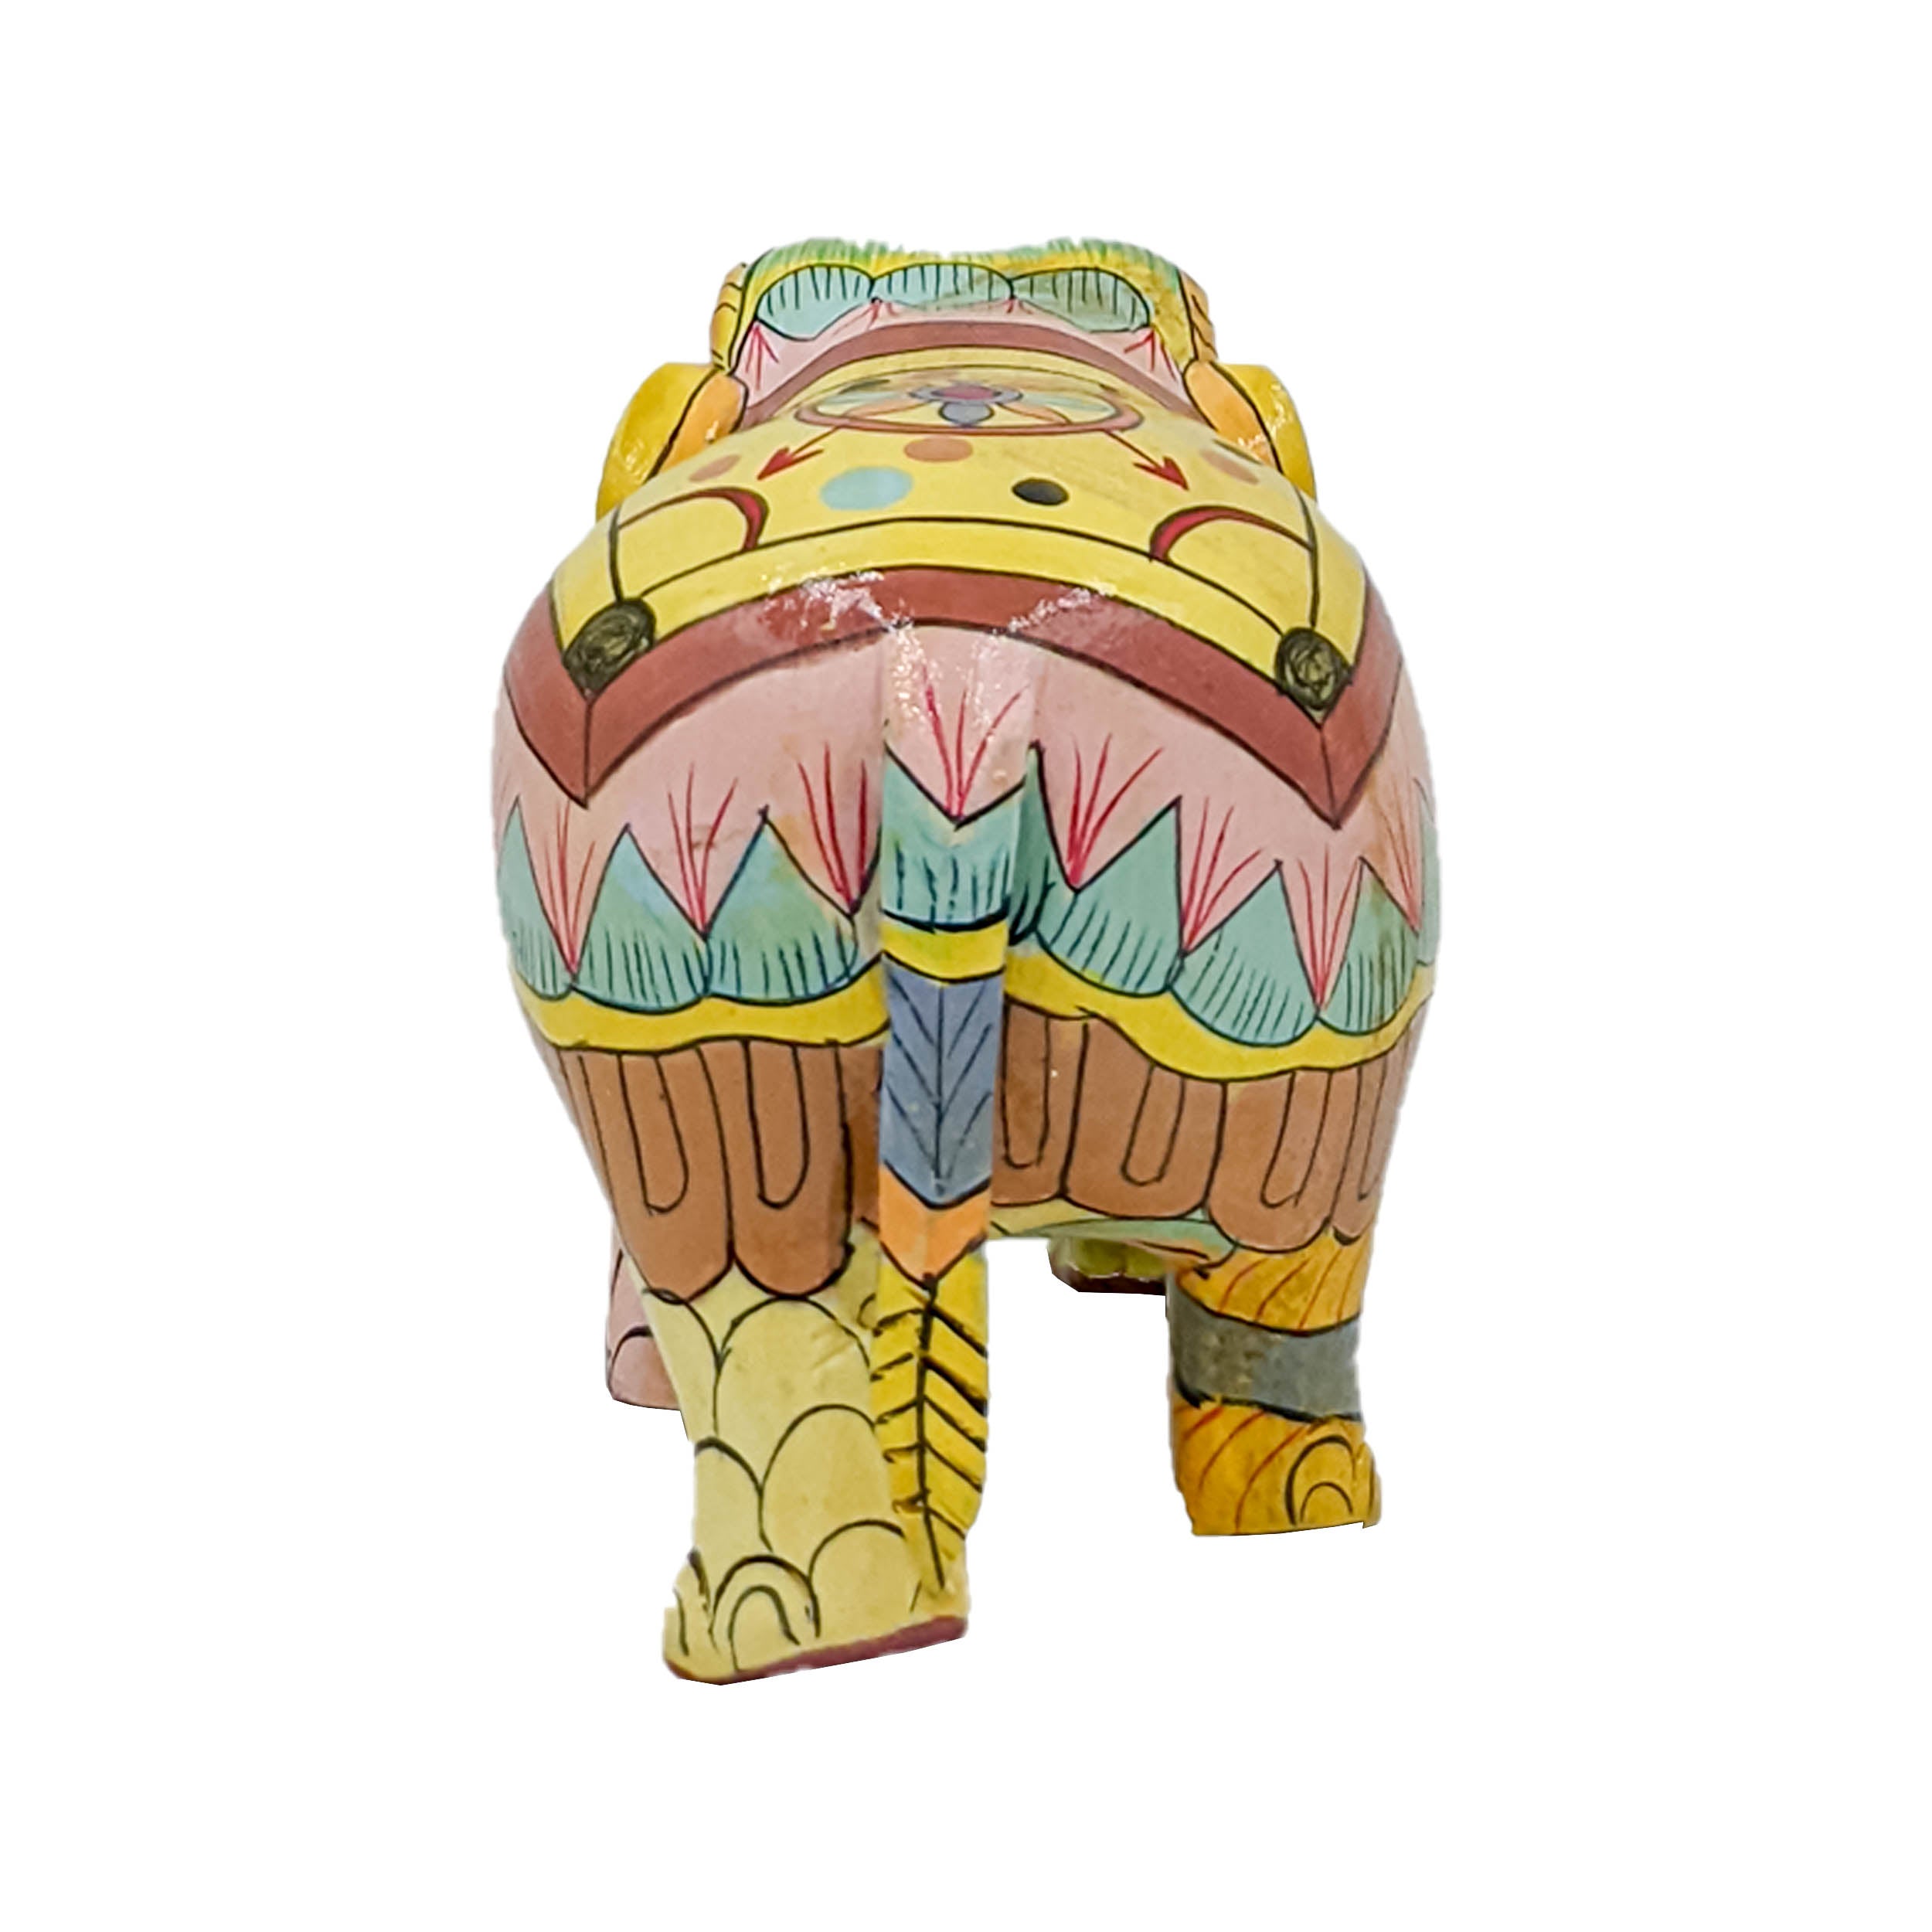 Wooden Handicraft Painted Carved Elephant 3-Inch